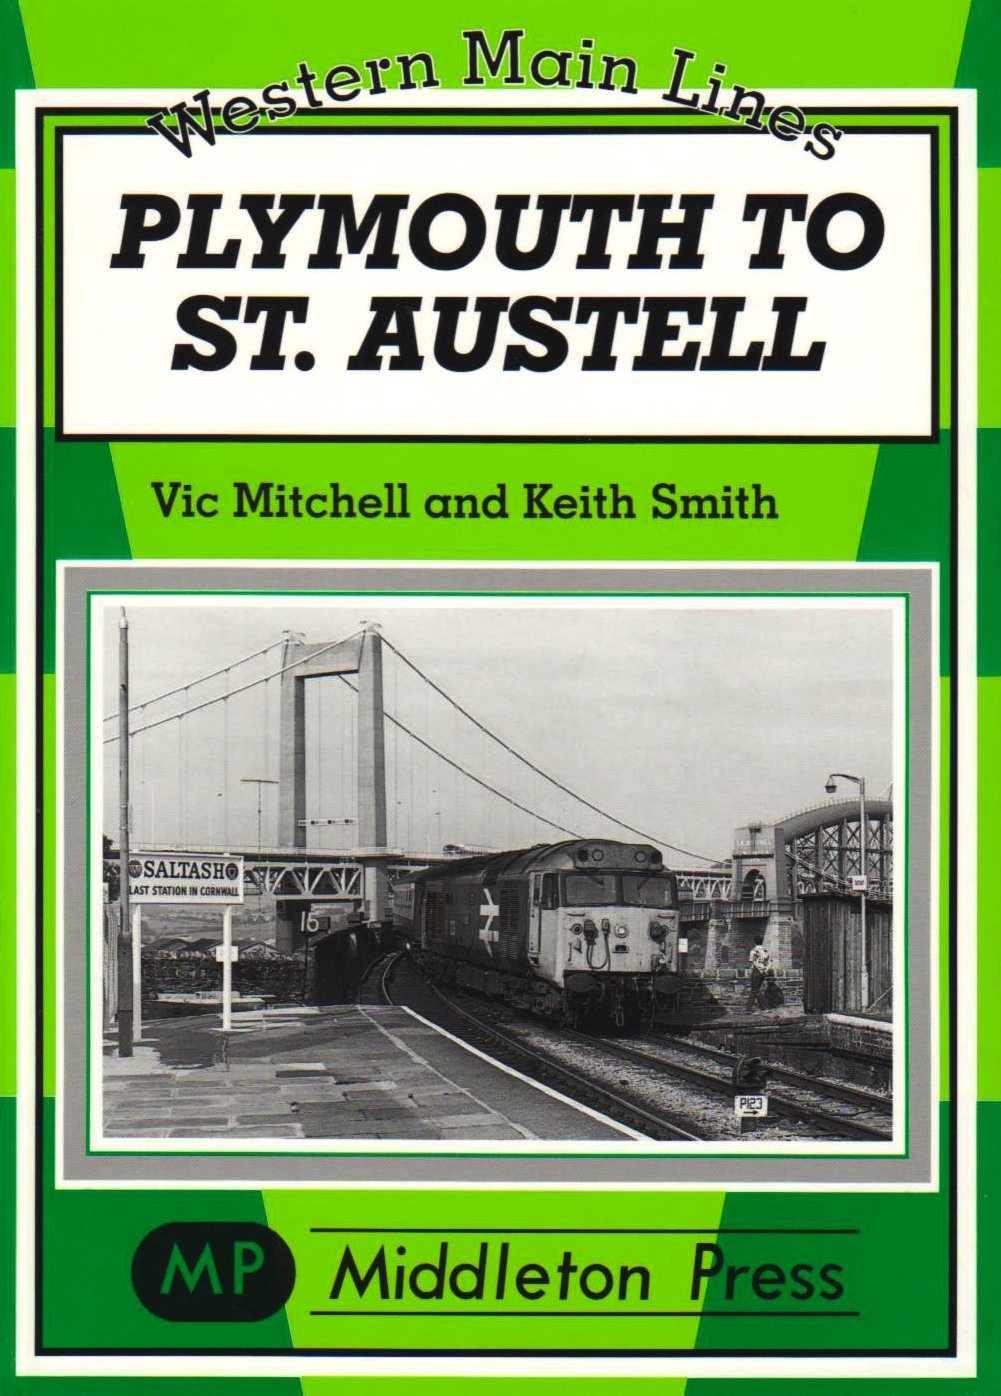 Western Main Lines Plymouth to St. Austell BEING REPRINTED